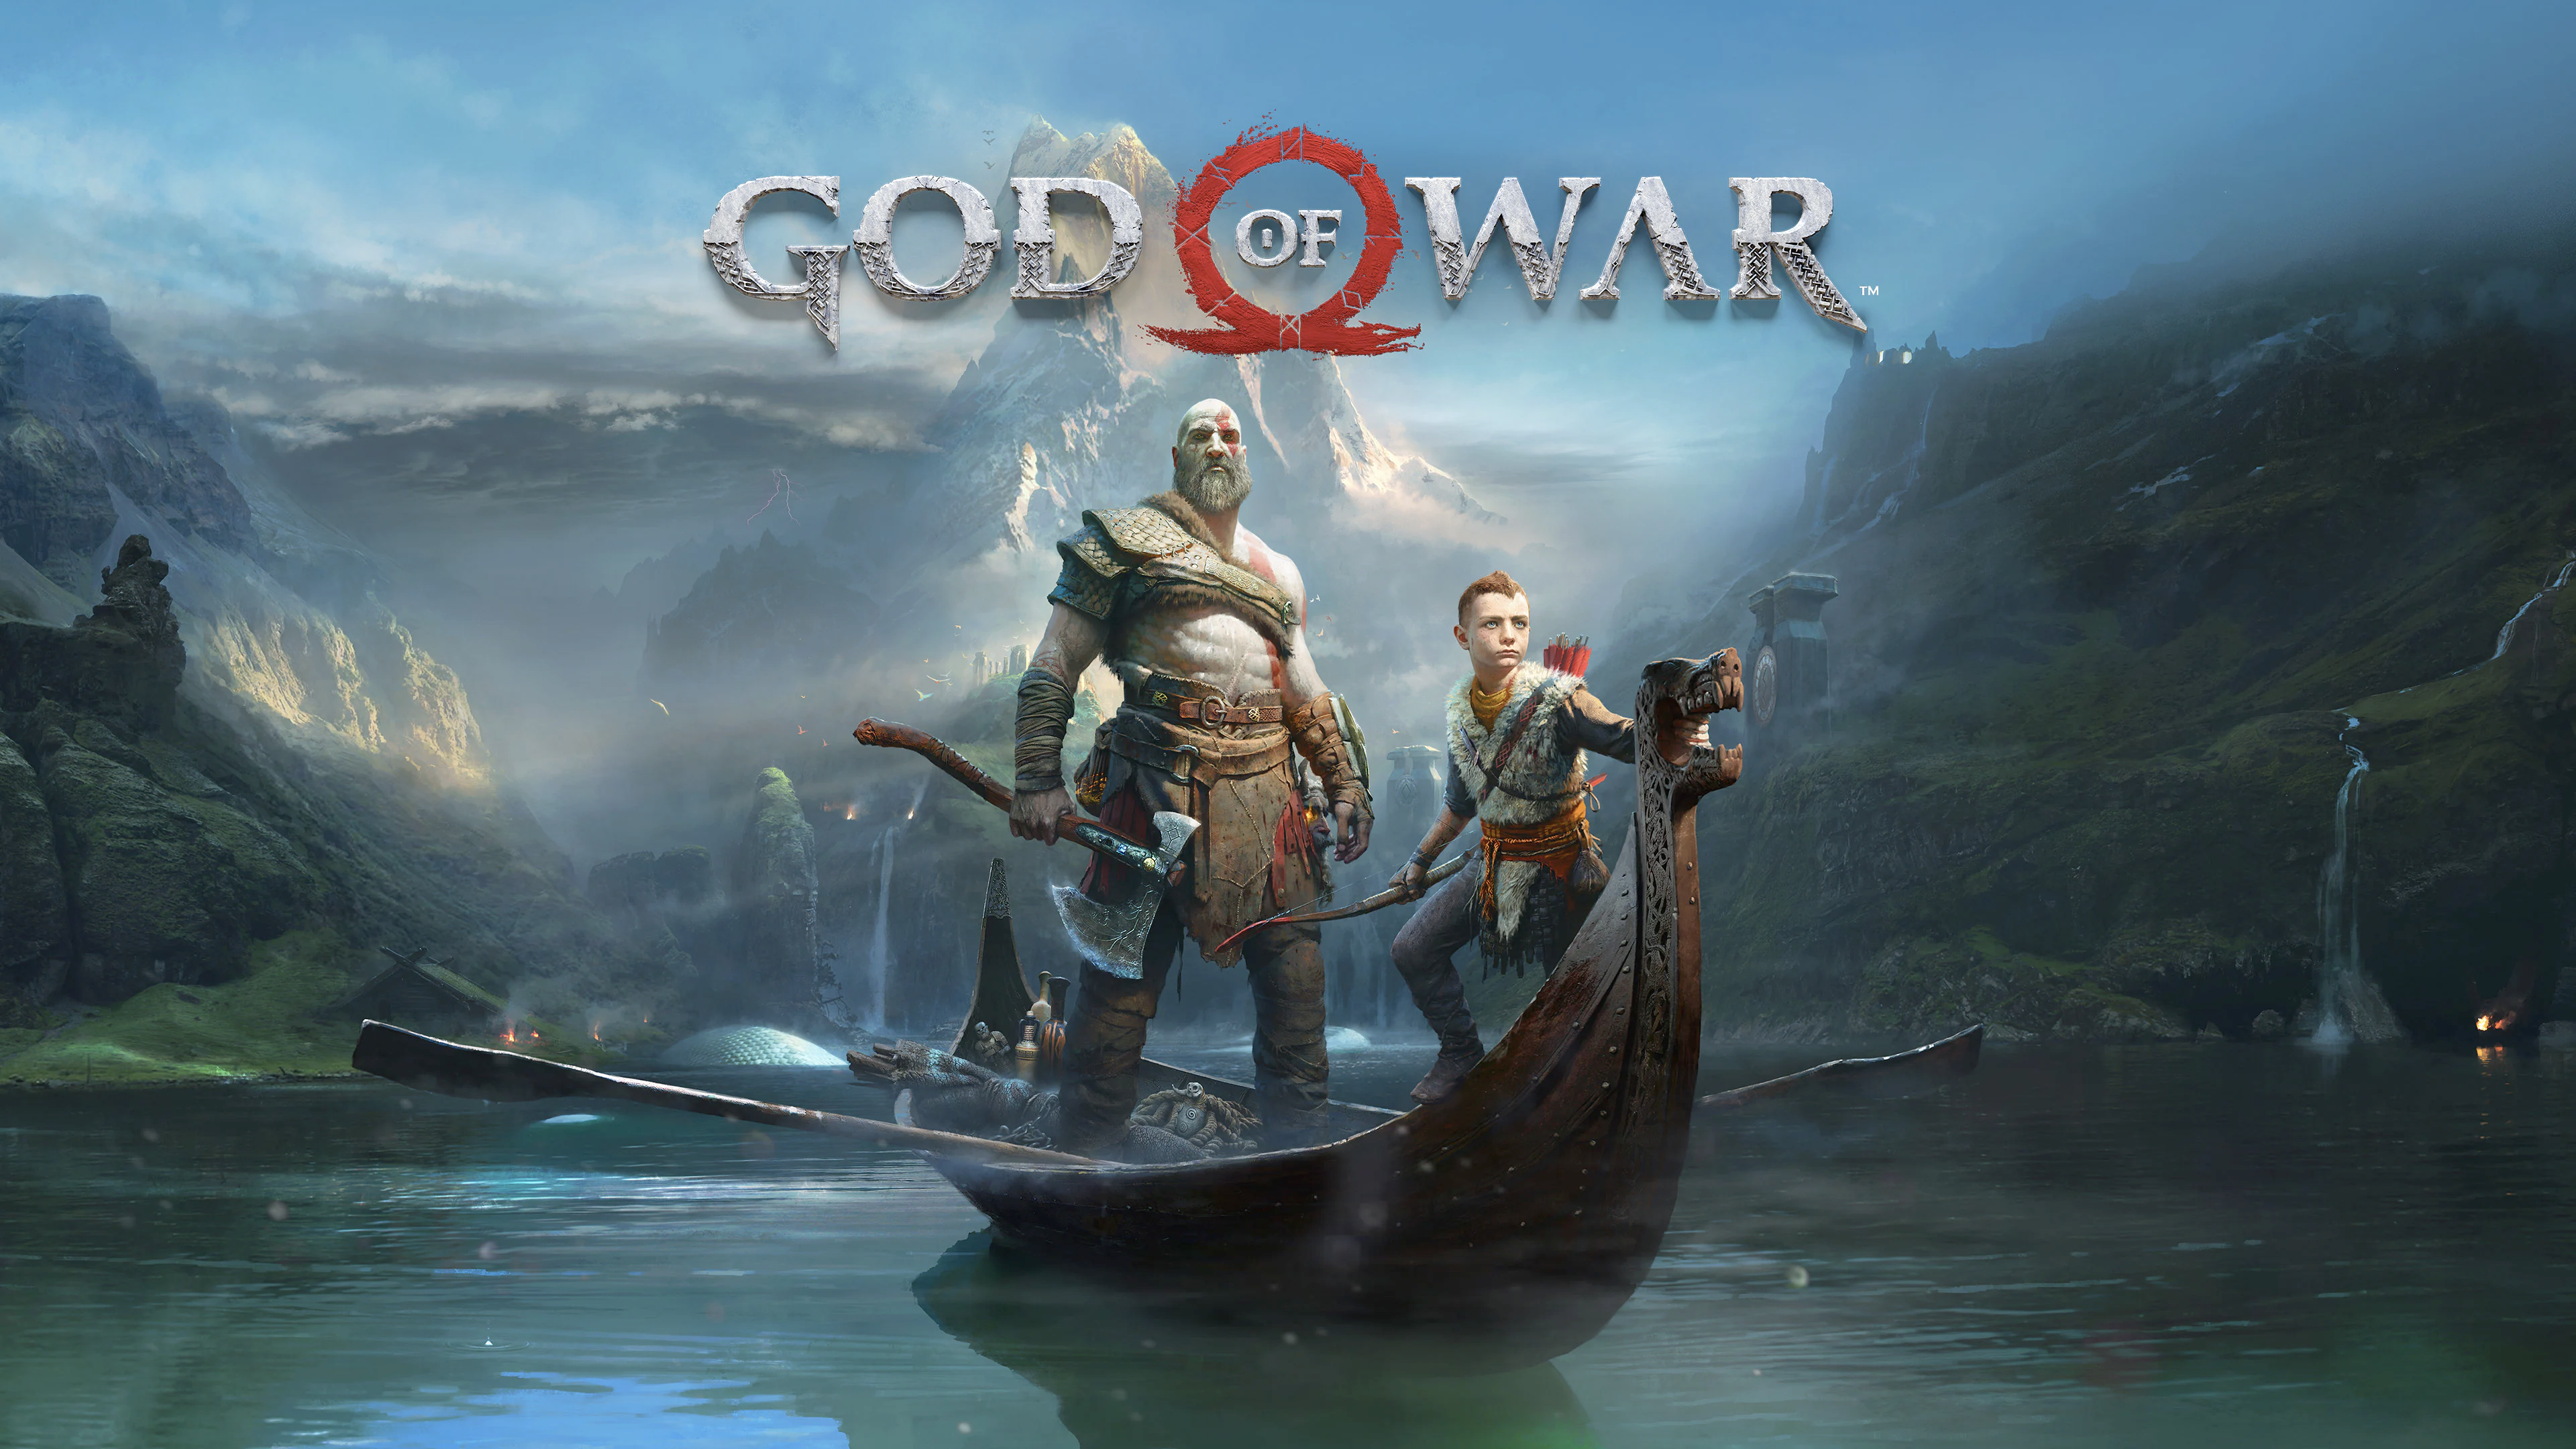 I only got around the playing the 2018 **[God of War](https://www.metacritic.com/game/playstation-4/god-of-war)** at the start of 2022 and ***Boy,*** what a game it is. A+, must play.